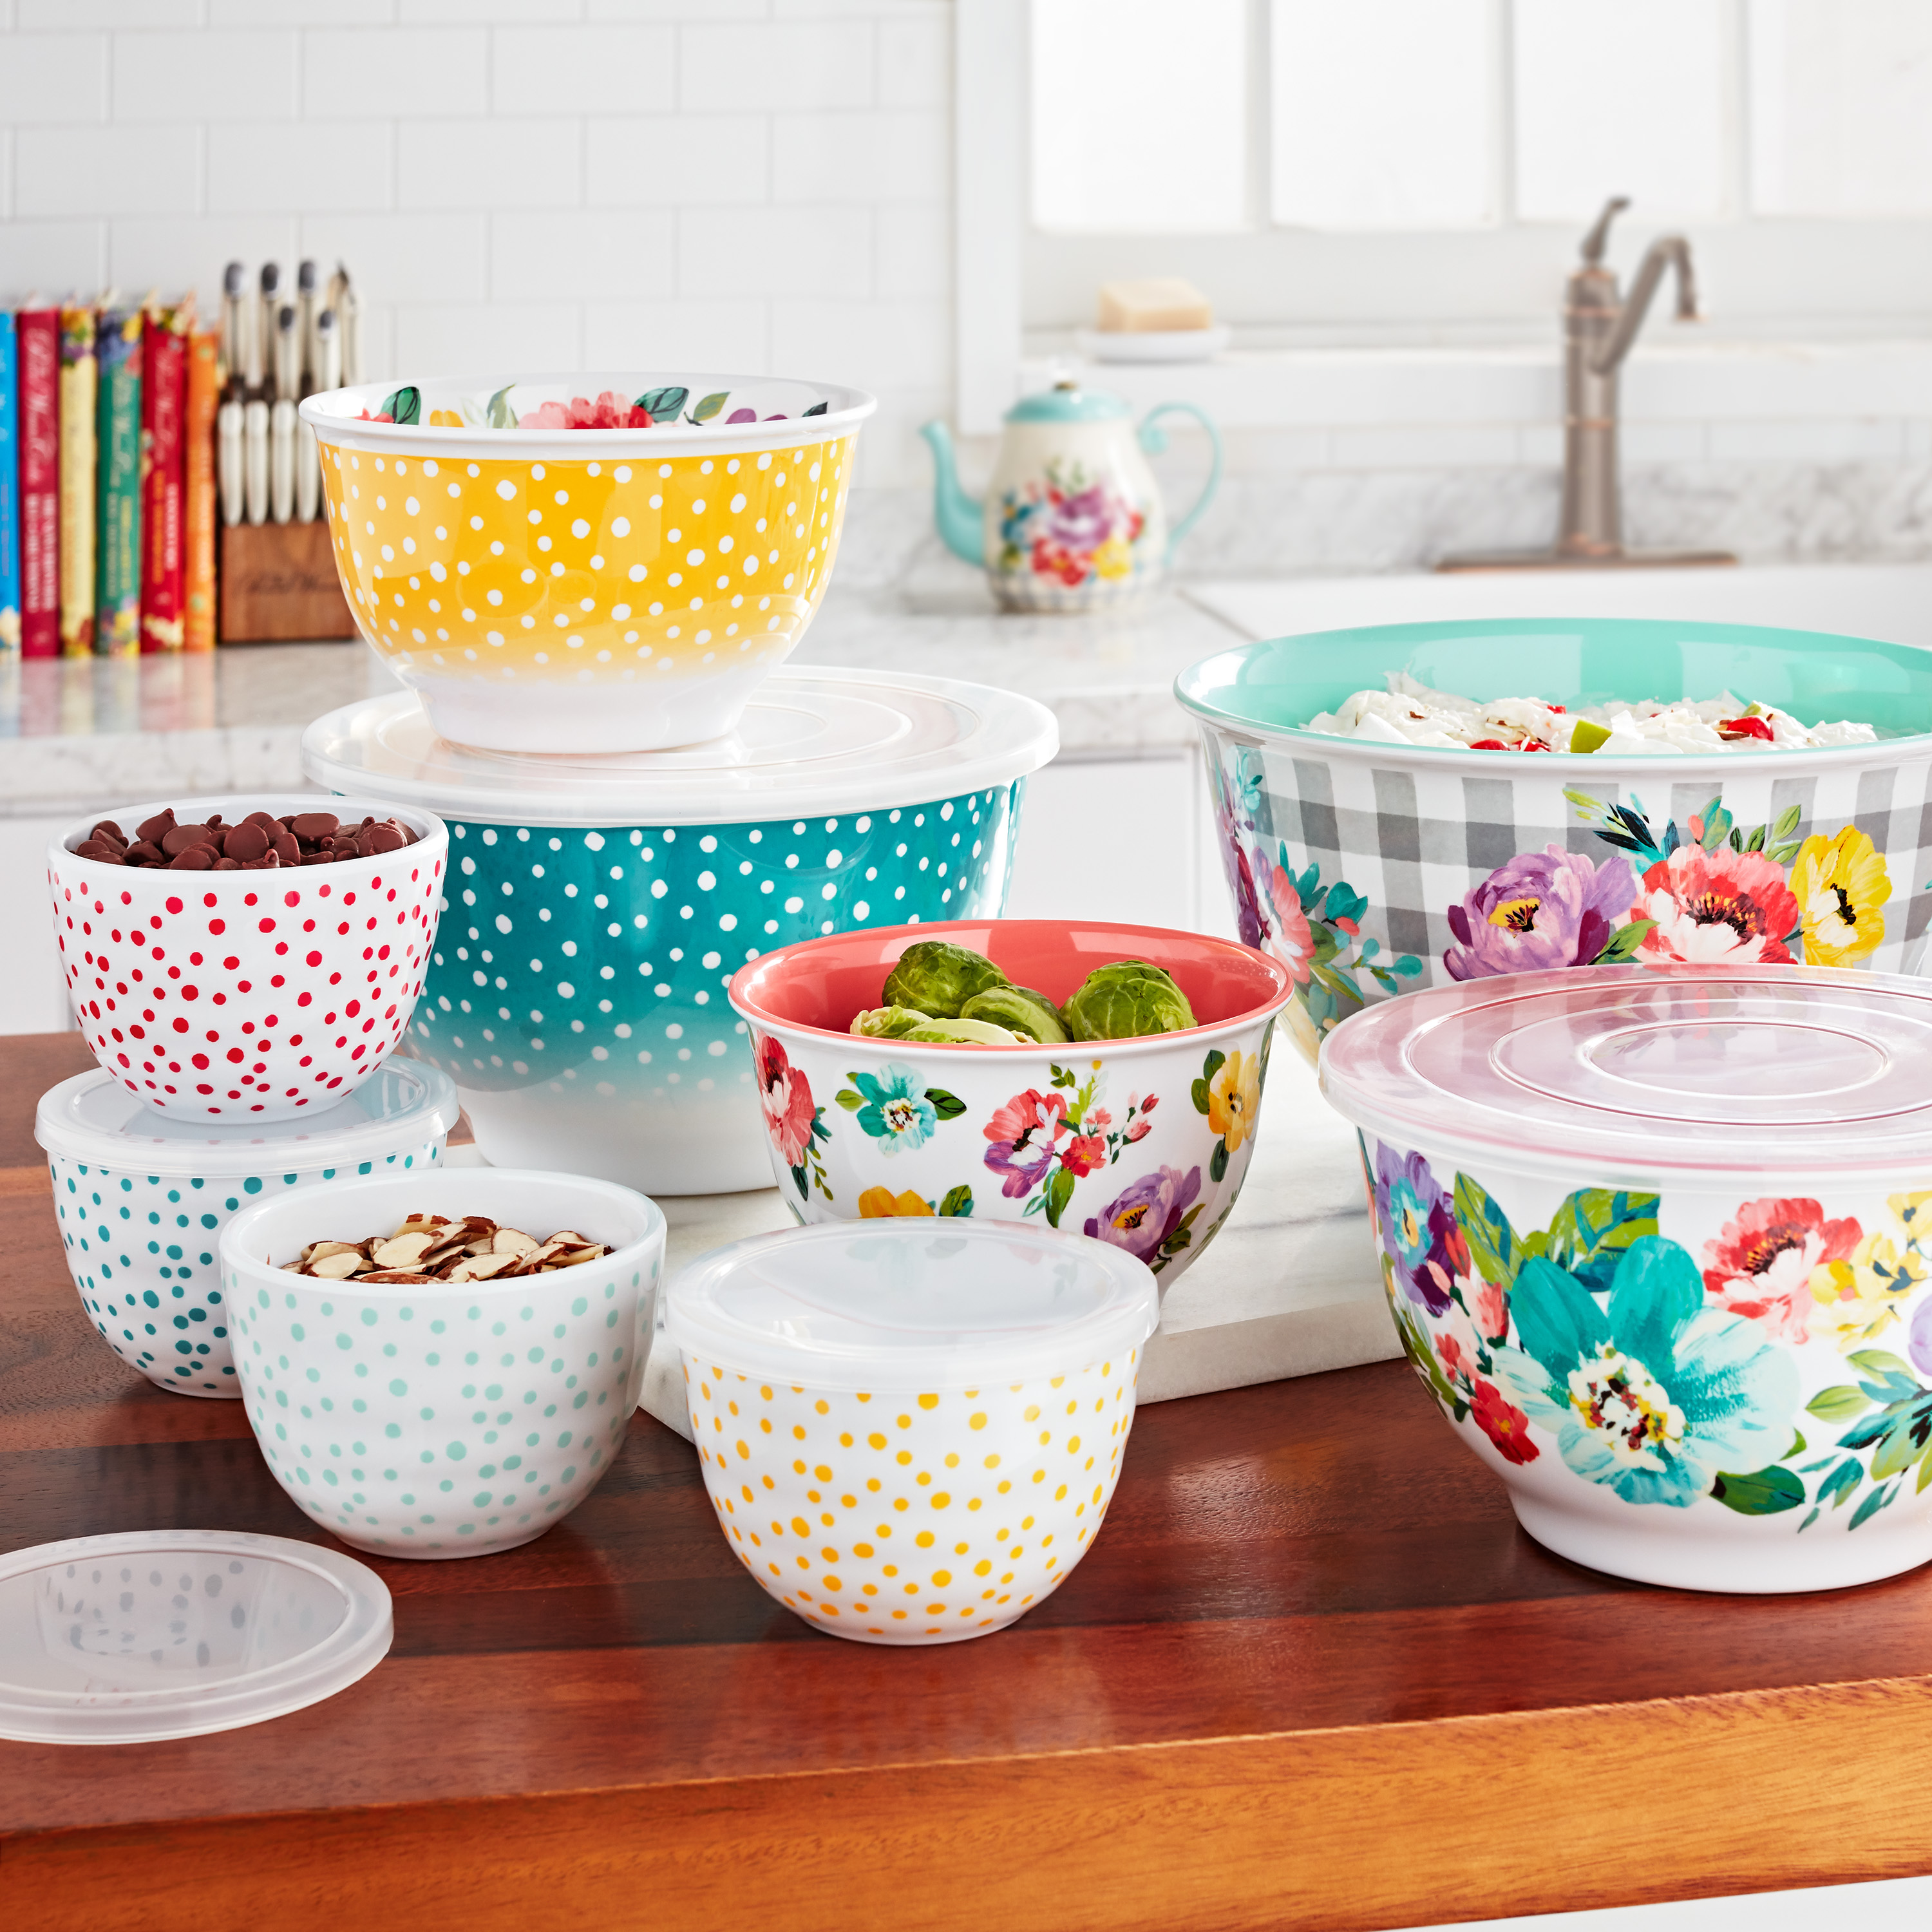 The Pioneer Woman Mixing Bowl Set with Lids, Sweet Romance, 18 Piece Set, Melamine - image 2 of 4